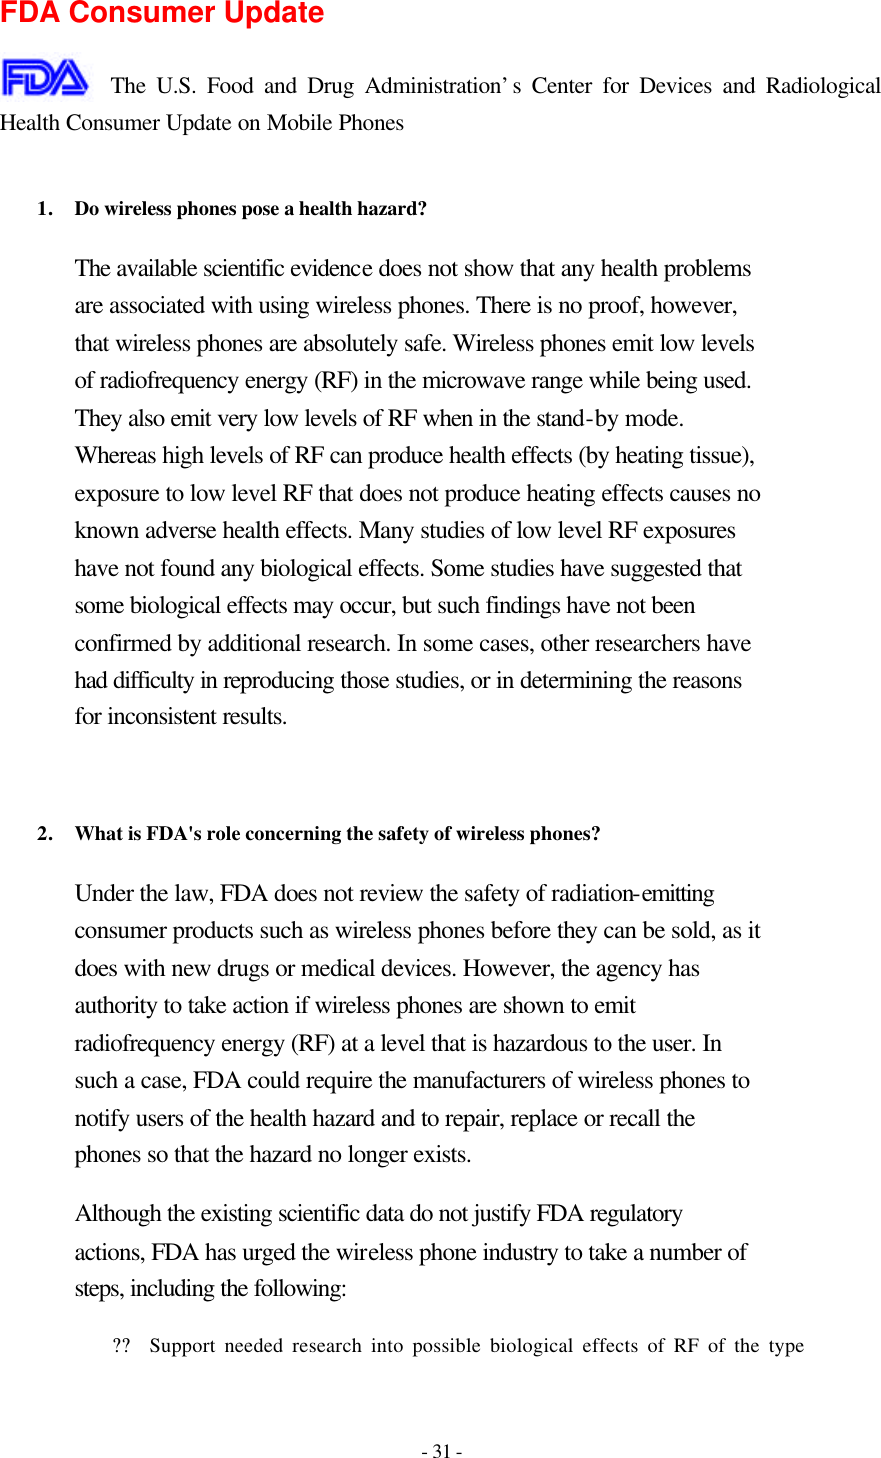 - 31 - FDA Consumer Update  The U.S. Food and Drug Administration’s Center for Devices and Radiological Health Consumer Update on Mobile Phones  1. Do wireless phones pose a health hazard?  The available scientific evidence does not show that any health problems are associated with using wireless phones. There is no proof, however, that wireless phones are absolutely safe. Wireless phones emit low levels of radiofrequency energy (RF) in the microwave range while being used. They also emit very low levels of RF when in the stand-by mode. Whereas high levels of RF can produce health effects (by heating tissue), exposure to low level RF that does not produce heating effects causes no known adverse health effects. Many studies of low level RF exposures have not found any biological effects. Some studies have suggested that some biological effects may occur, but such findings have not been confirmed by additional research. In some cases, other researchers have had difficulty in reproducing those studies, or in determining the reasons for inconsistent results.   2. What is FDA&apos;s role concerning the safety of wireless phones?  Under the law, FDA does not review the safety of radiation-emitting consumer products such as wireless phones before they can be sold, as it does with new drugs or medical devices. However, the agency has authority to take action if wireless phones are shown to emit radiofrequency energy (RF) at a level that is hazardous to the user. In such a case, FDA could require the manufacturers of wireless phones to notify users of the health hazard and to repair, replace or recall the phones so that the hazard no longer exists. Although the existing scientific data do not justify FDA regulatory actions, FDA has urged the wireless phone industry to take a number of steps, including the following: ?? Support needed research into possible biological effects of RF of the type 